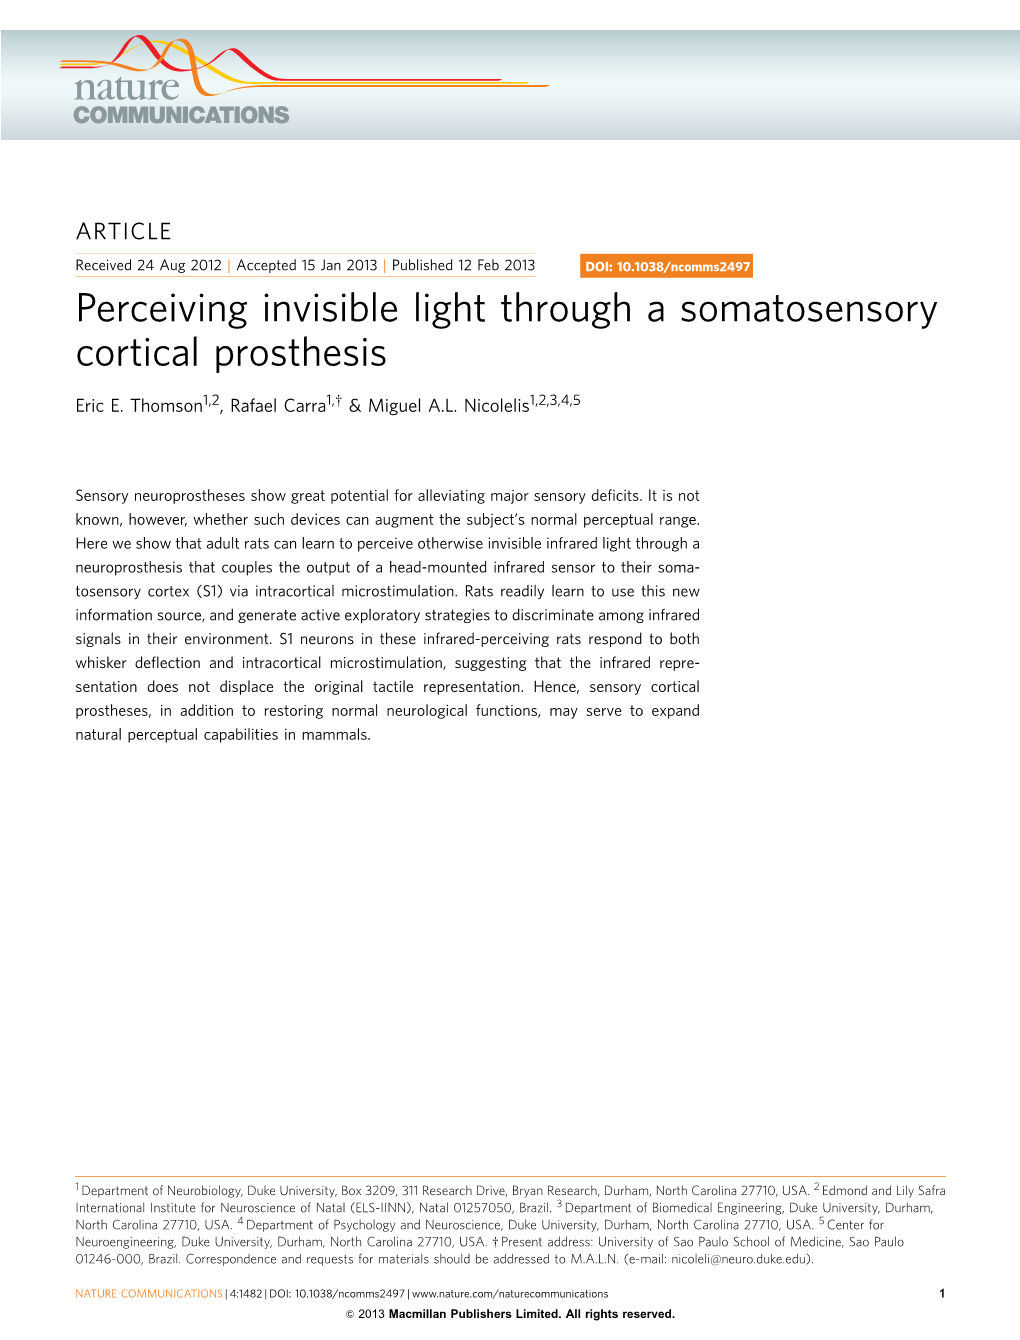 Perceiving Invisible Light Through a Somatosensory Cortical Prosthesis